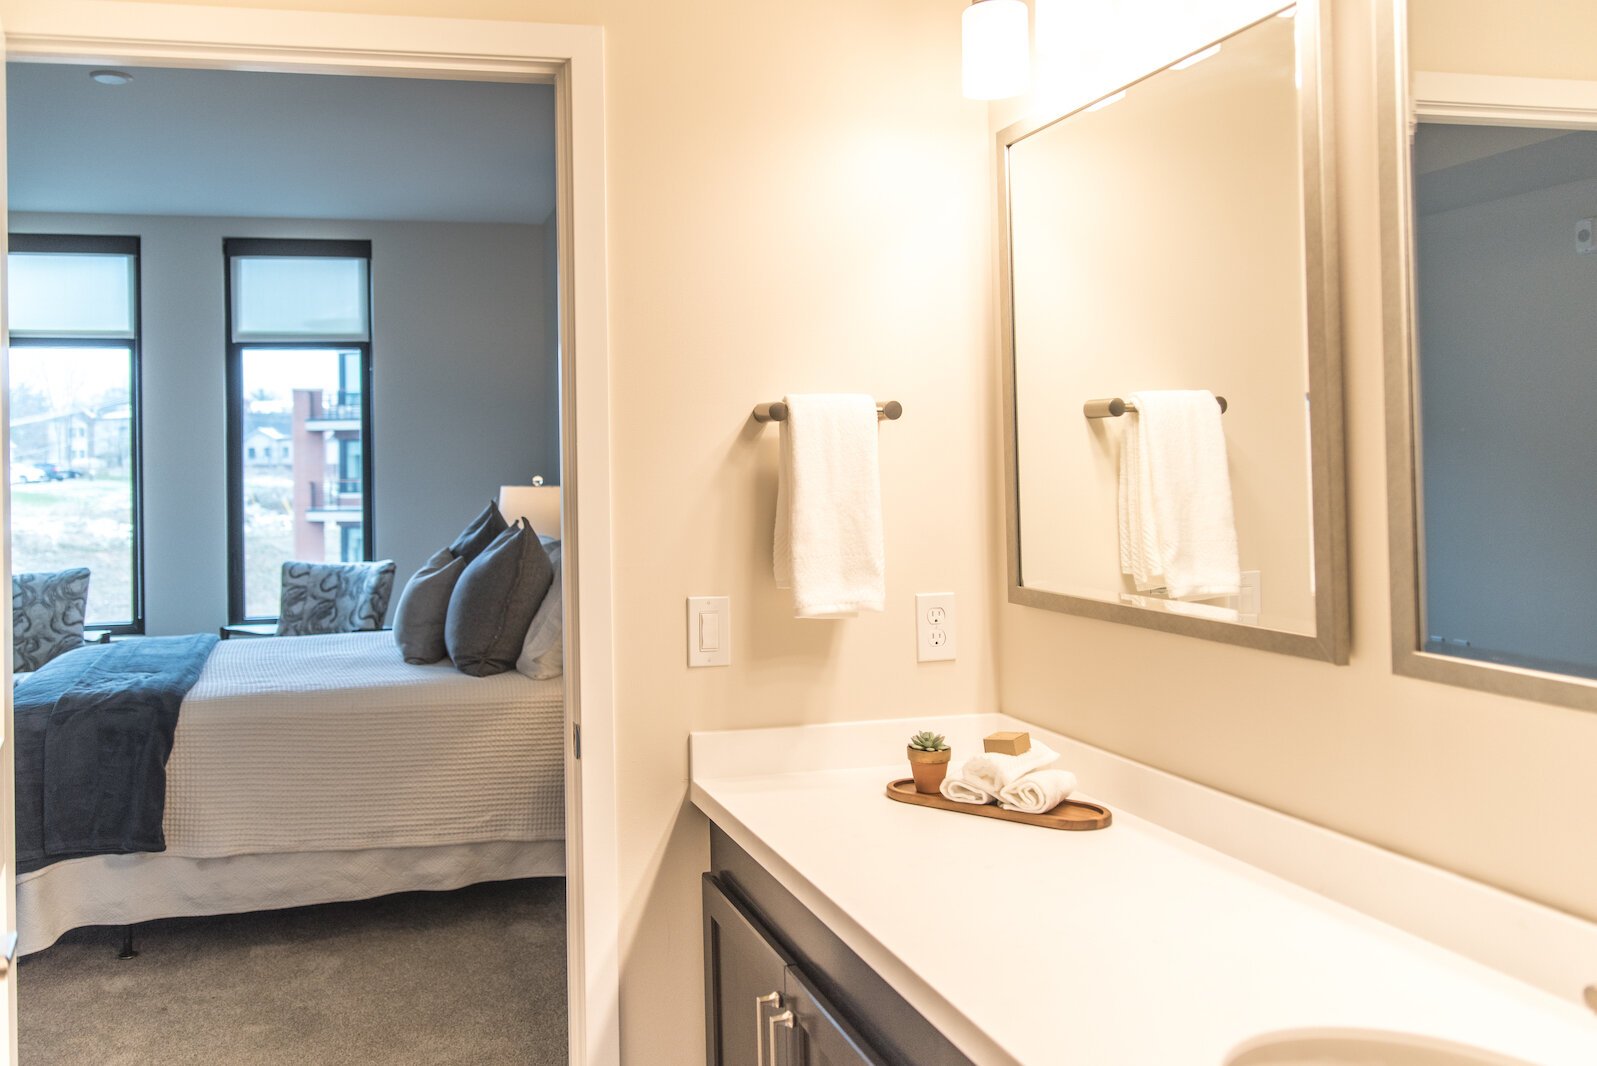 Here is a look inside a model apartment at Revel Creek. The complex has 10 different floor plans for the one- and two-bedroom apartments. They range from 881 square feet to 1,597 square feet.